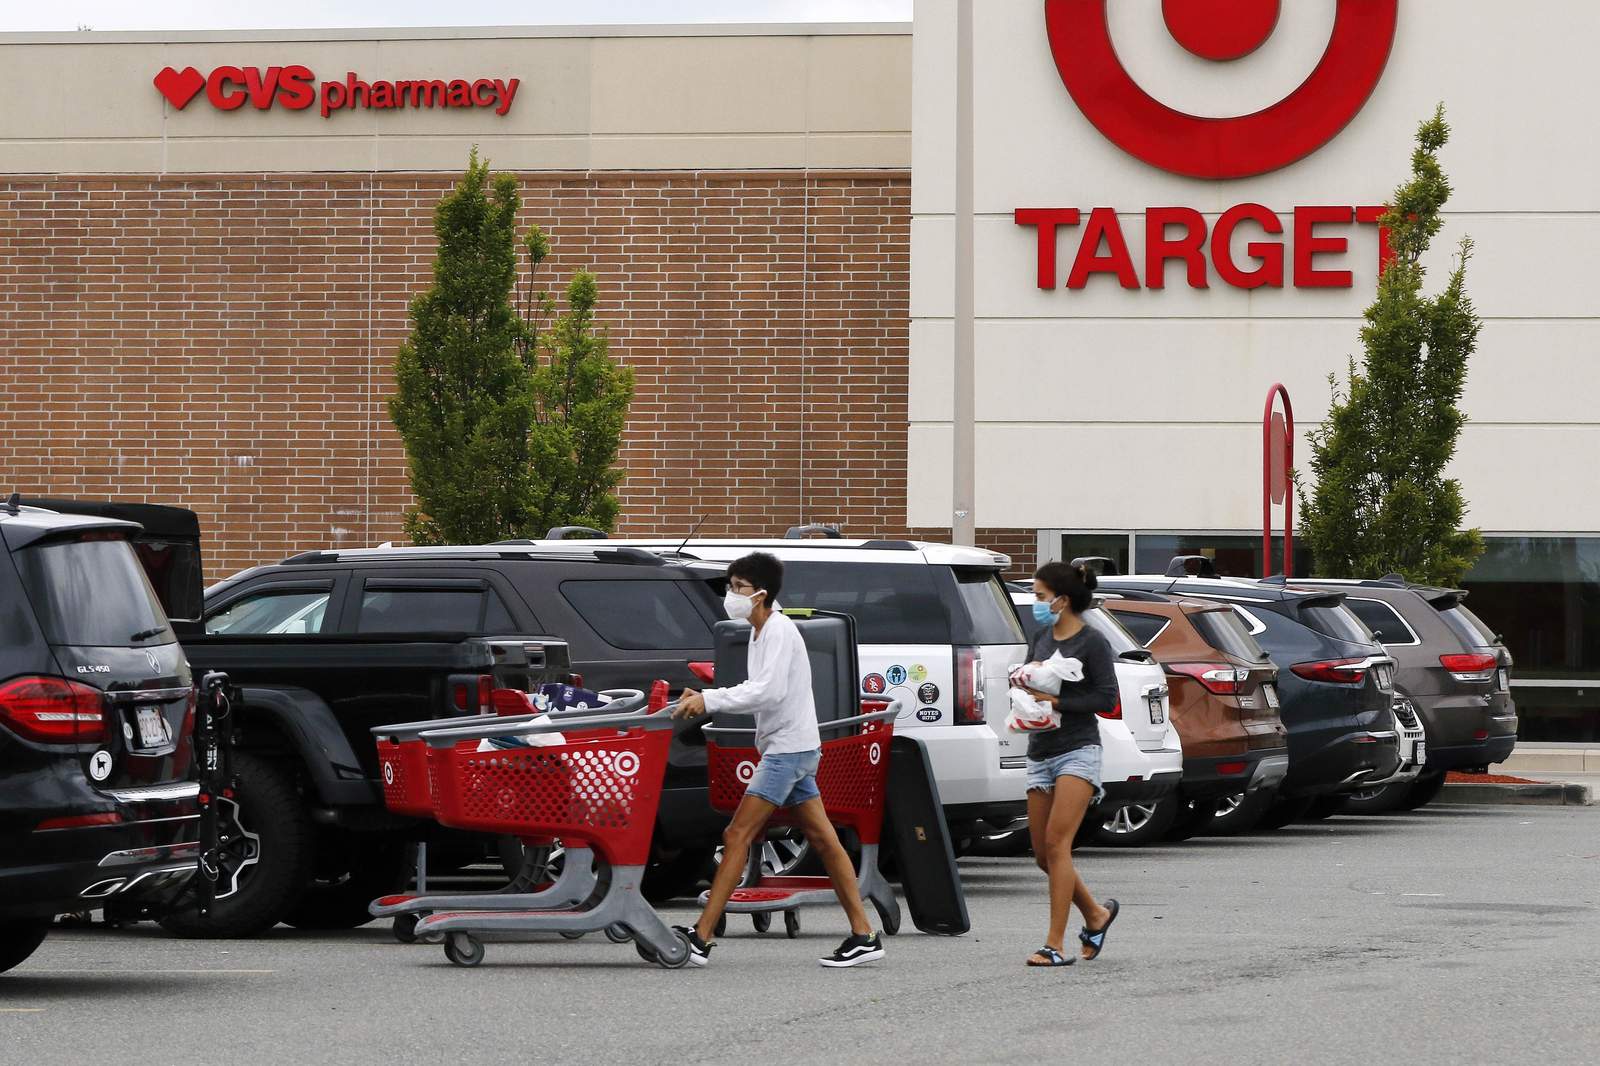 Target continues to thrive in whirlwind retail environment